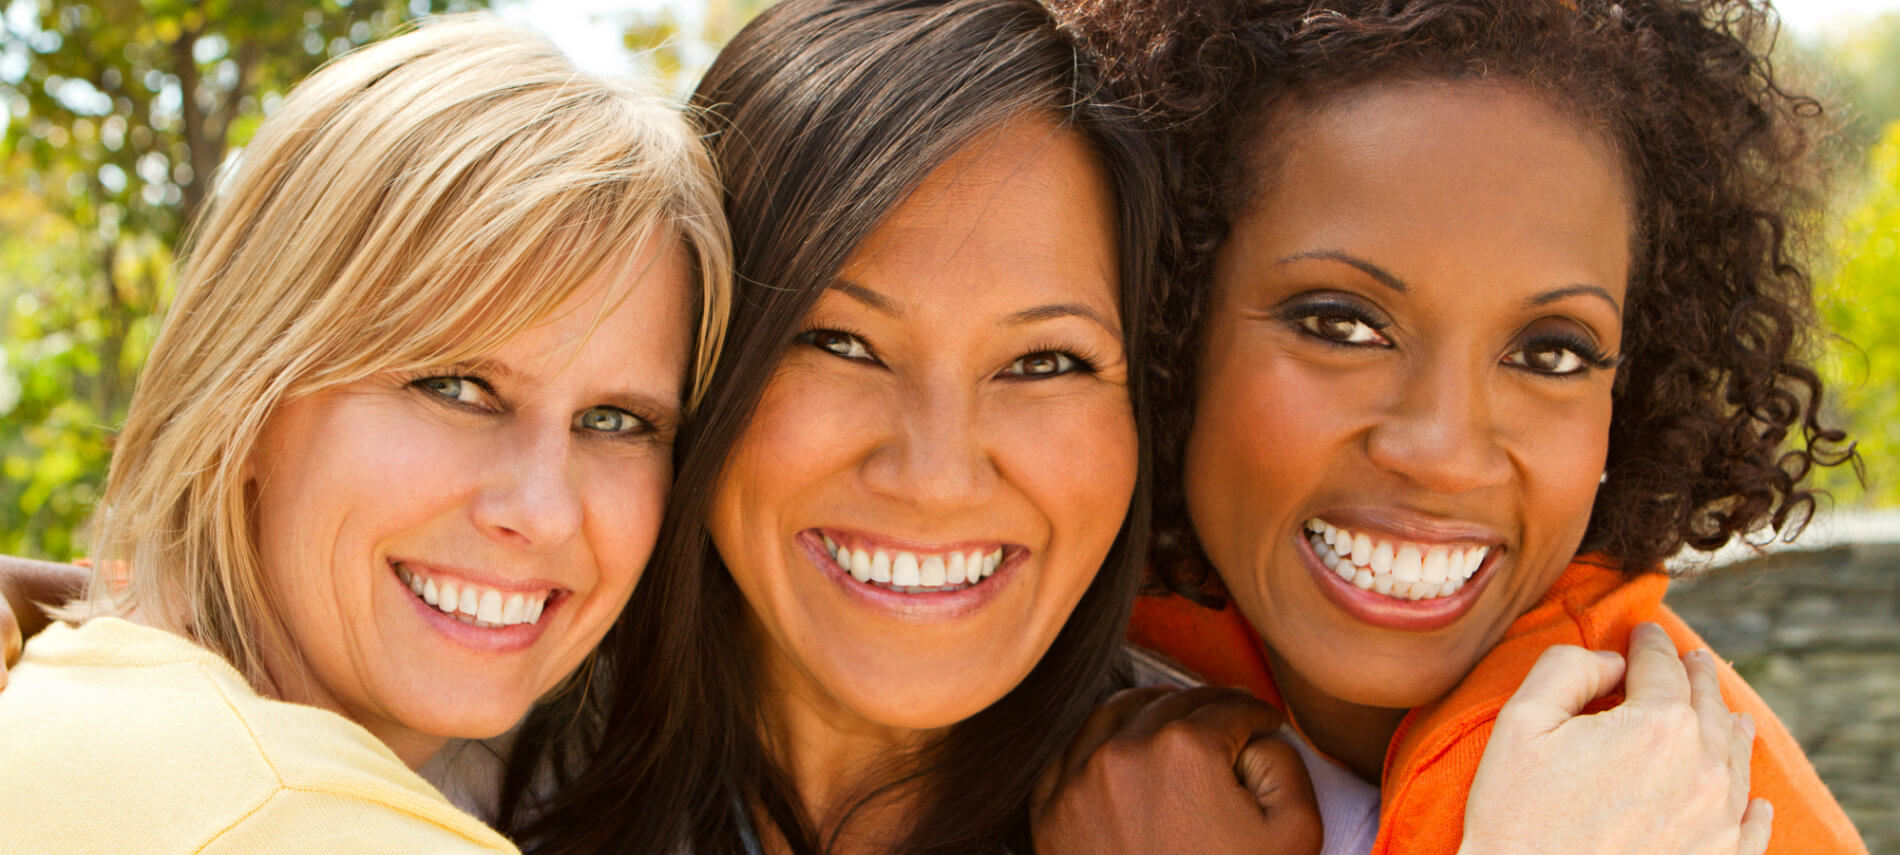 Three women smiling and showing bright white teeth to the camera.